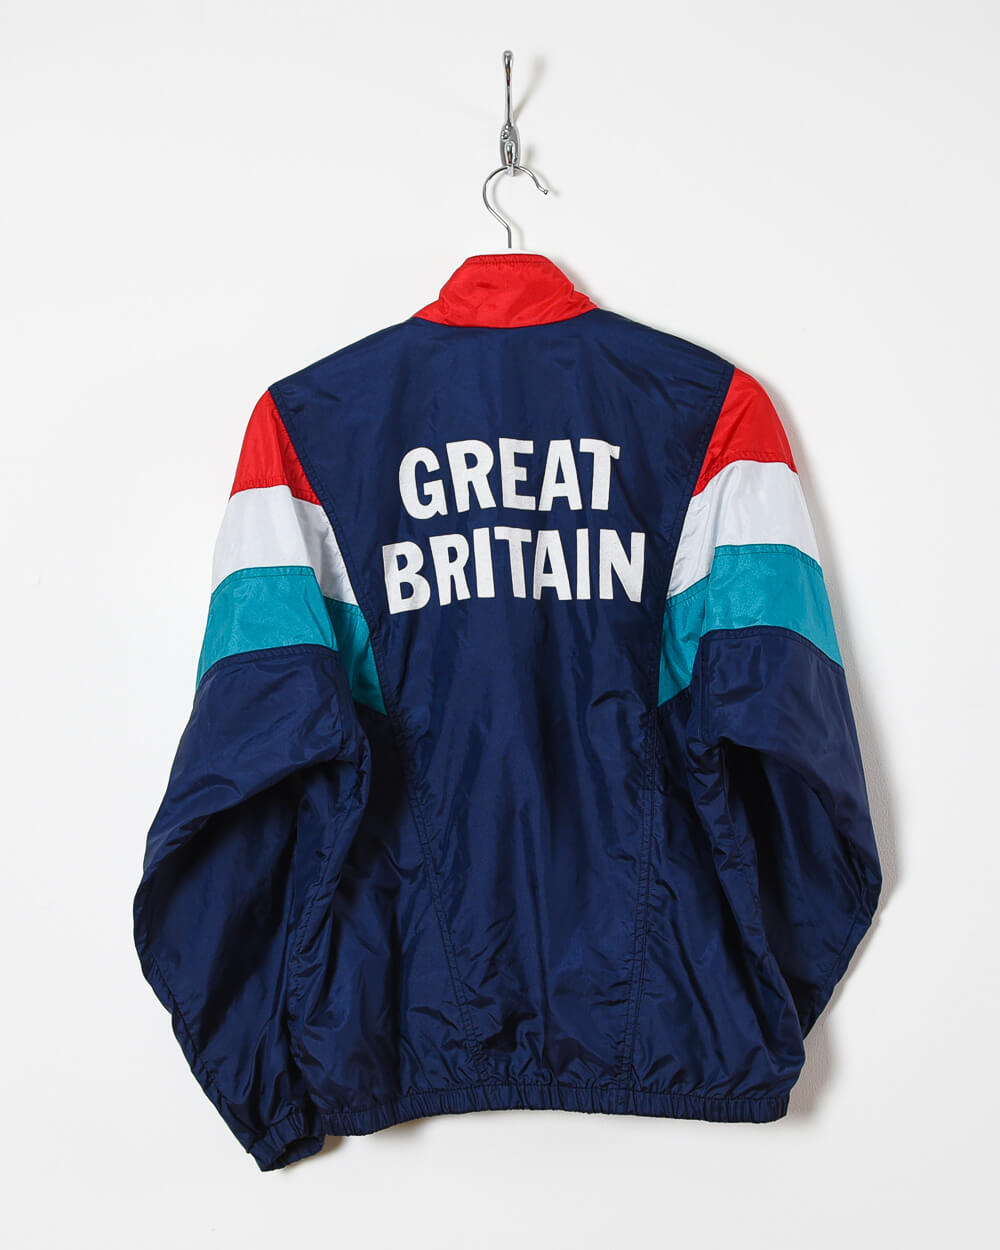 Adidas Shell Jacket - Small - Domno Vintage 90s, 80s, 00s Retro and Vintage Clothing 